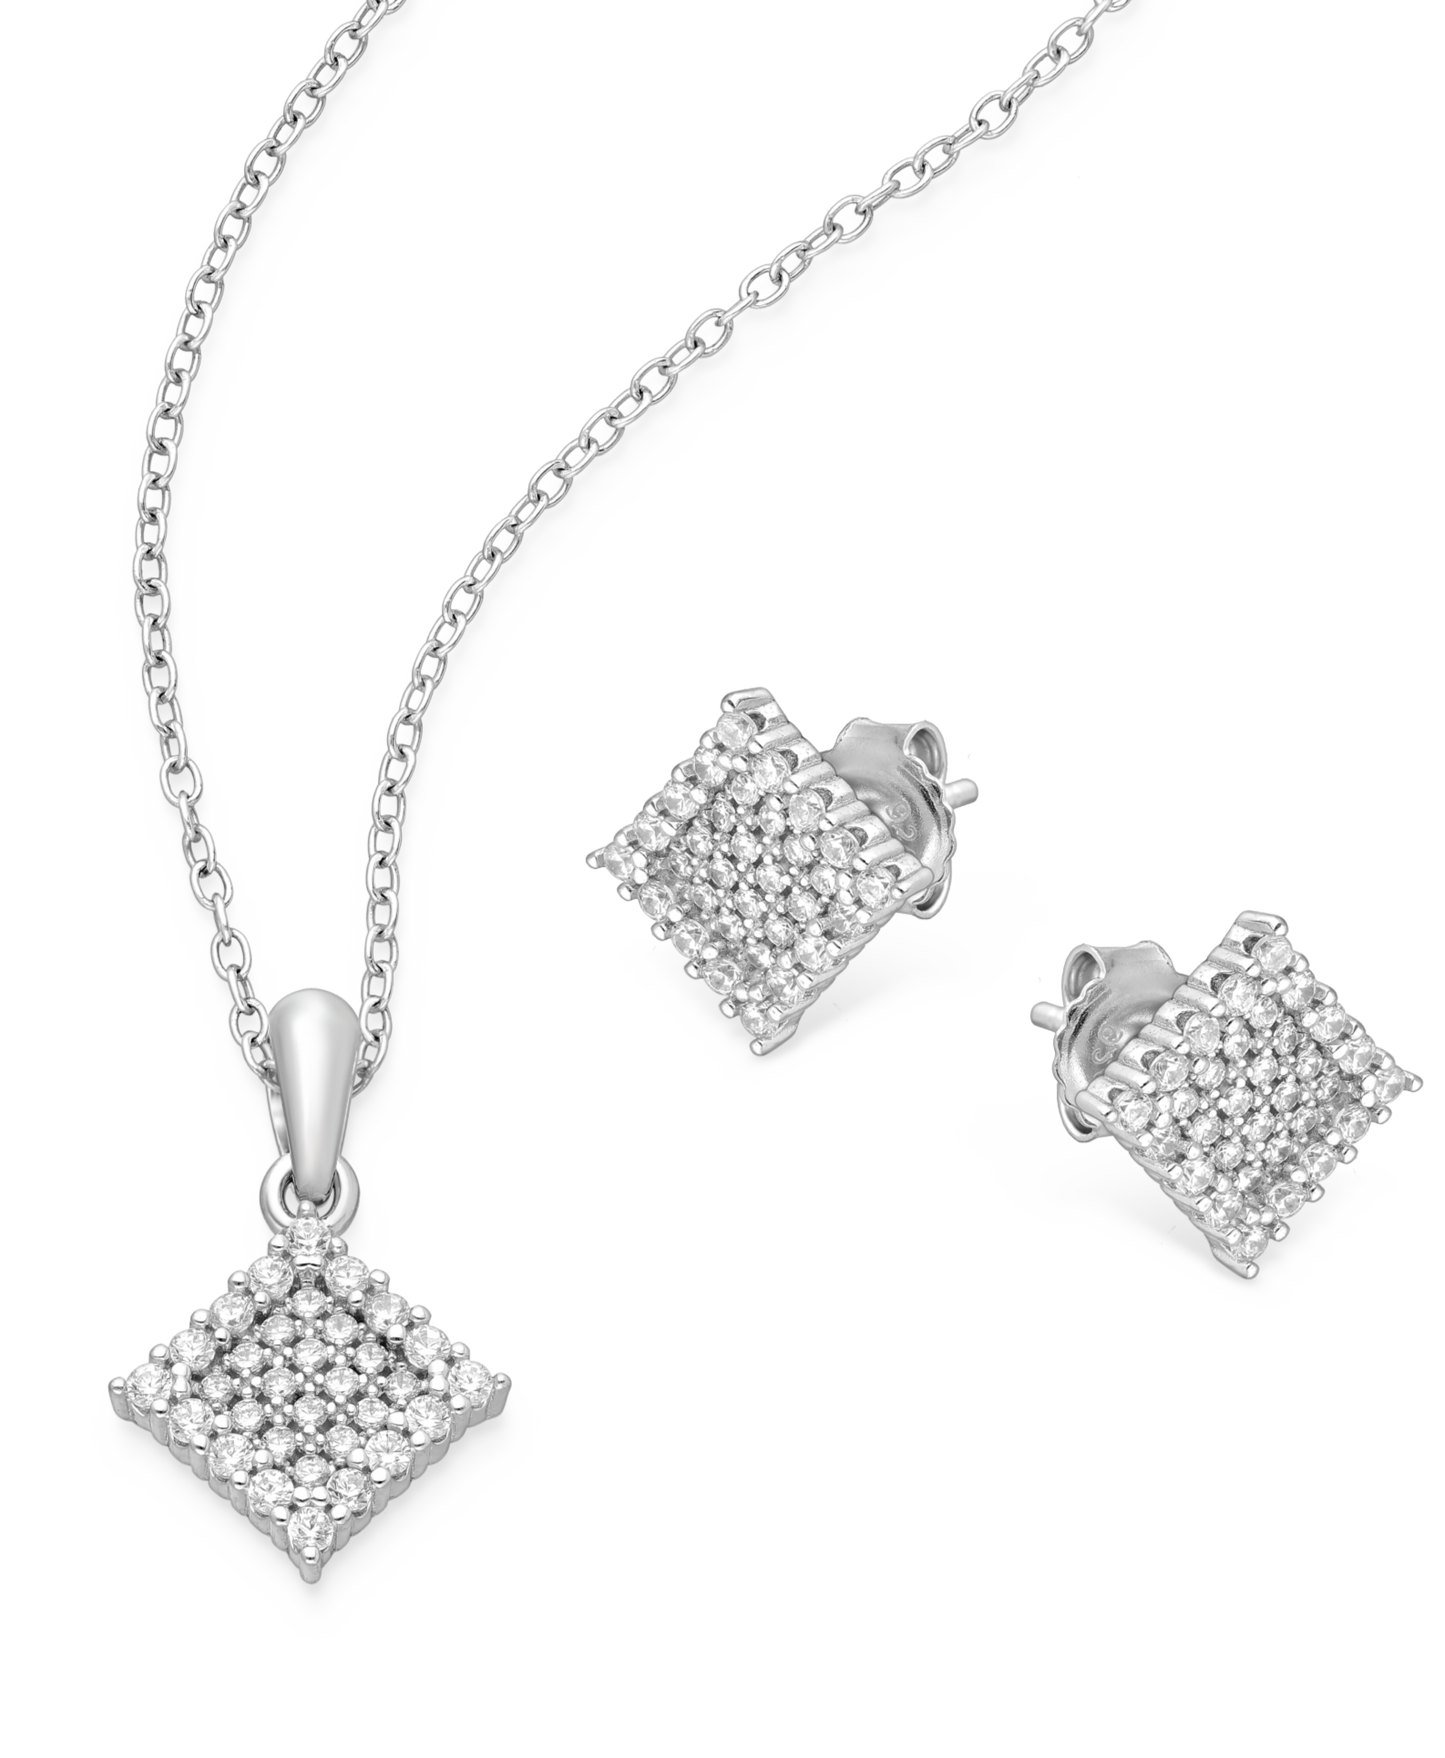 Sterling Silver Push-Back Earrings and Pendant Set with White CZ Simulated Diamonds